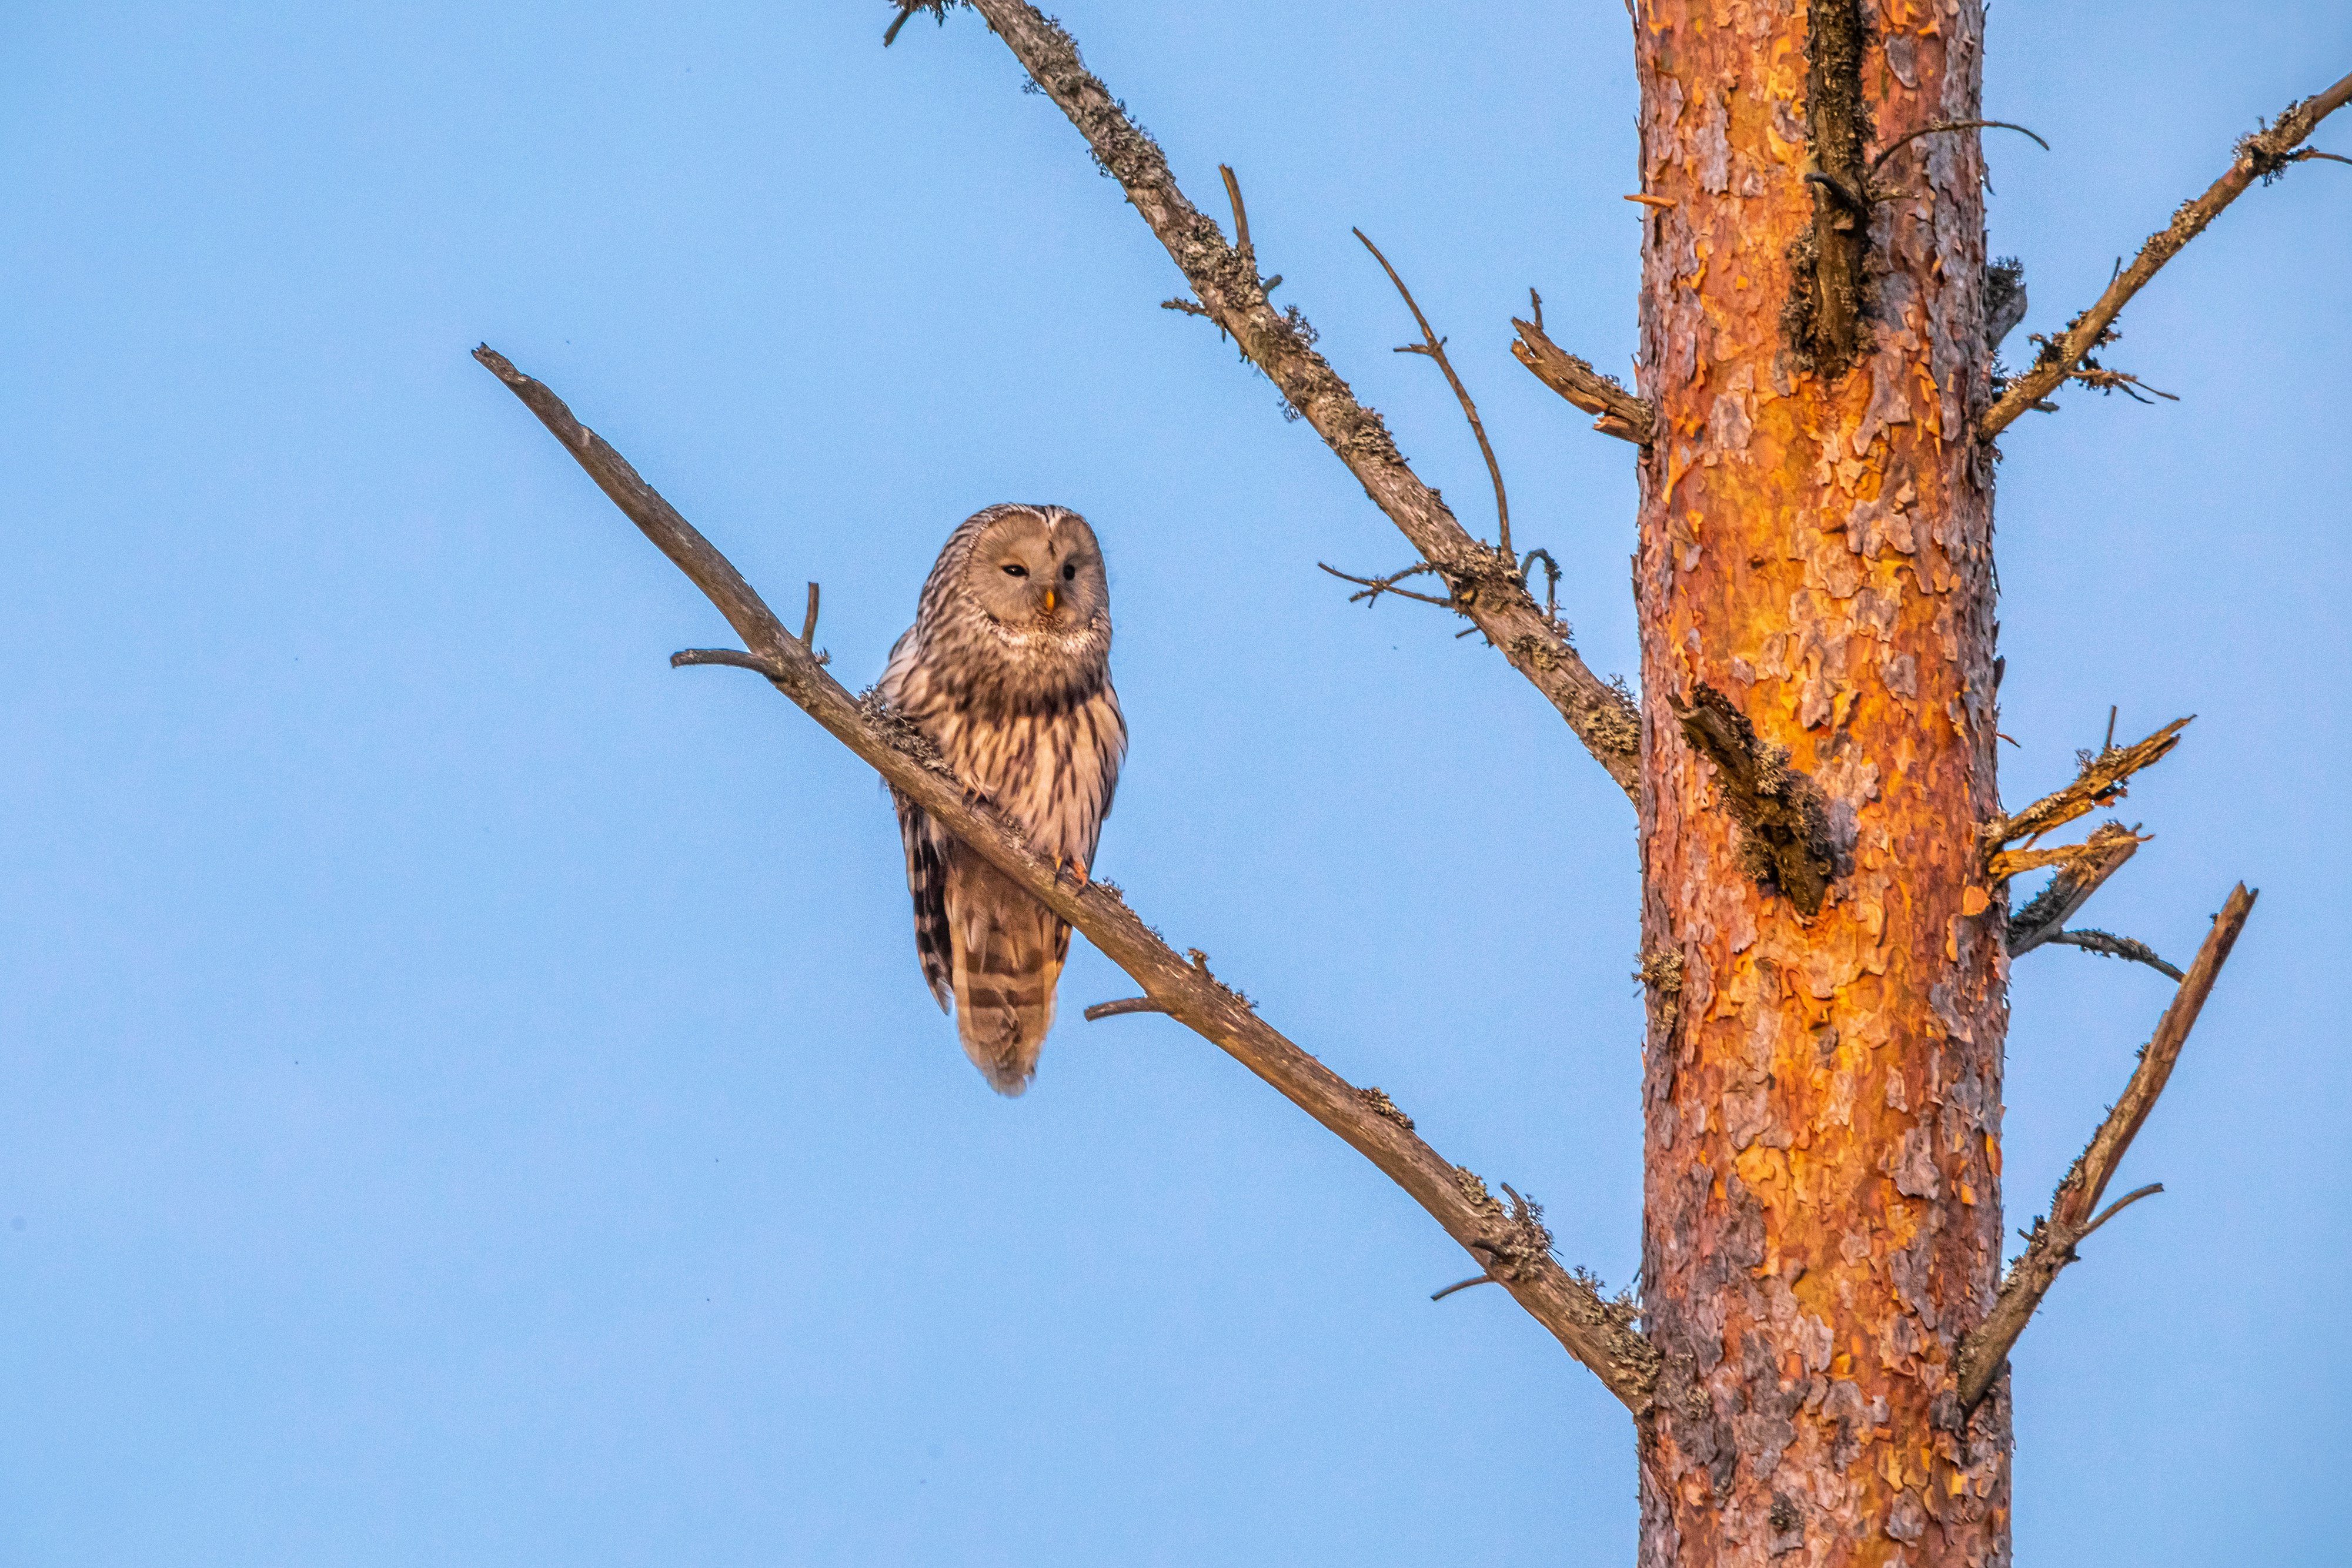 brown owl perched on brown tree branch during daytime